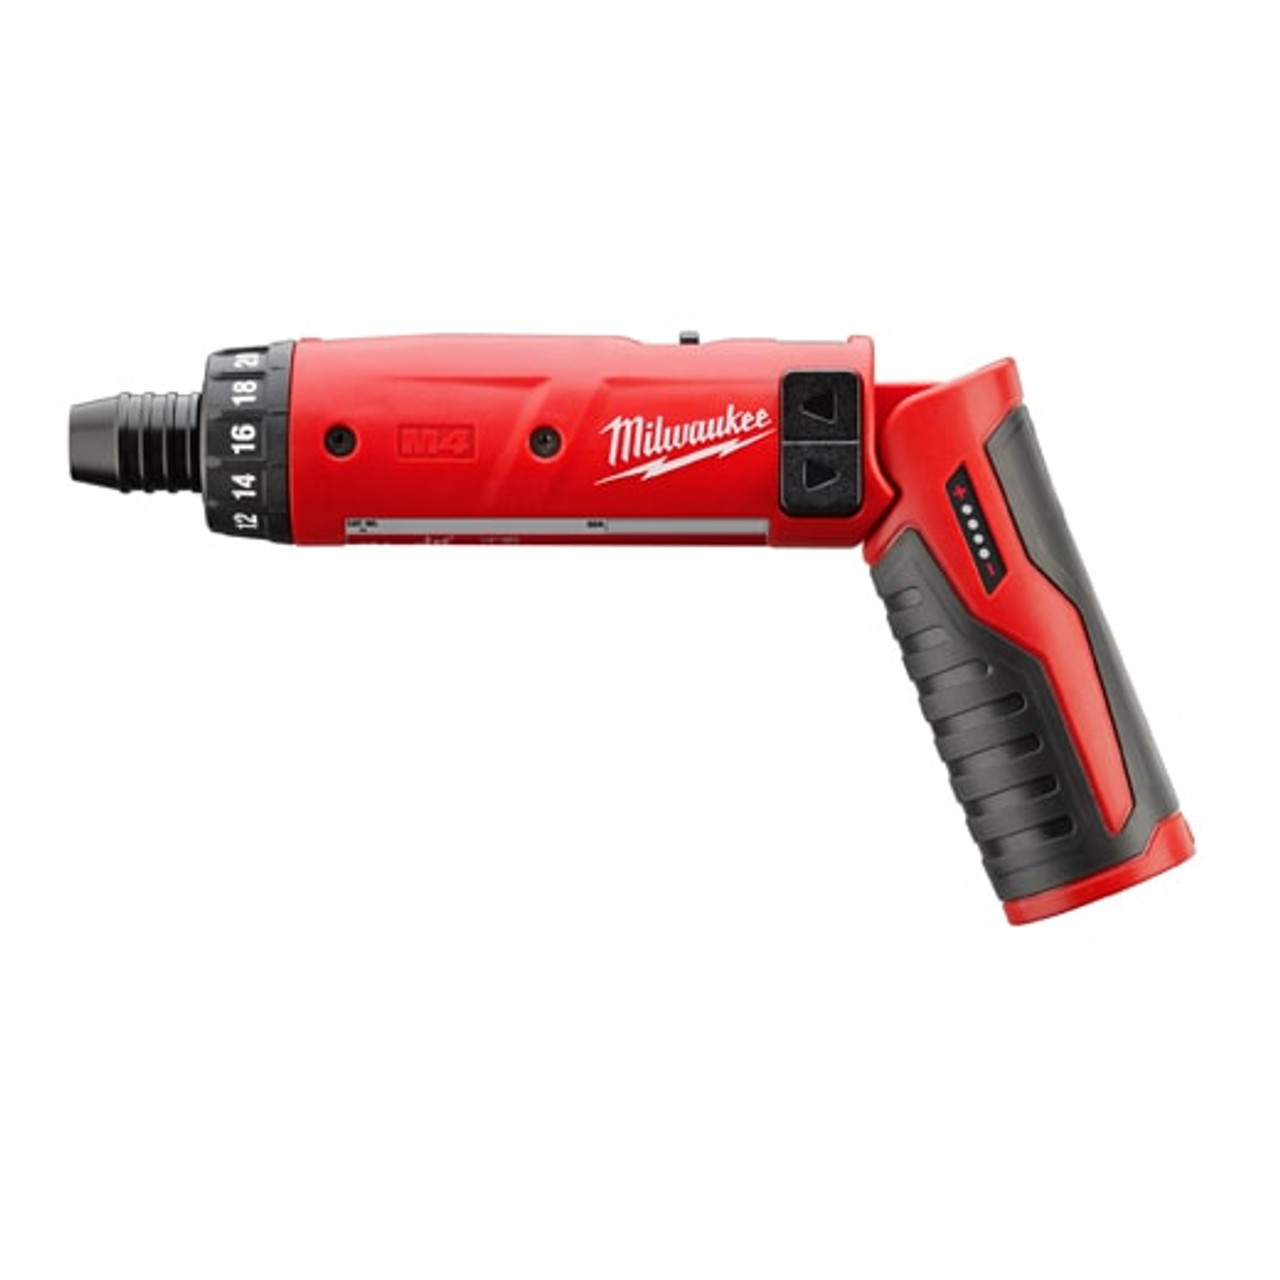 M4? 1/4" Hex Screwdriver (Tool Only)